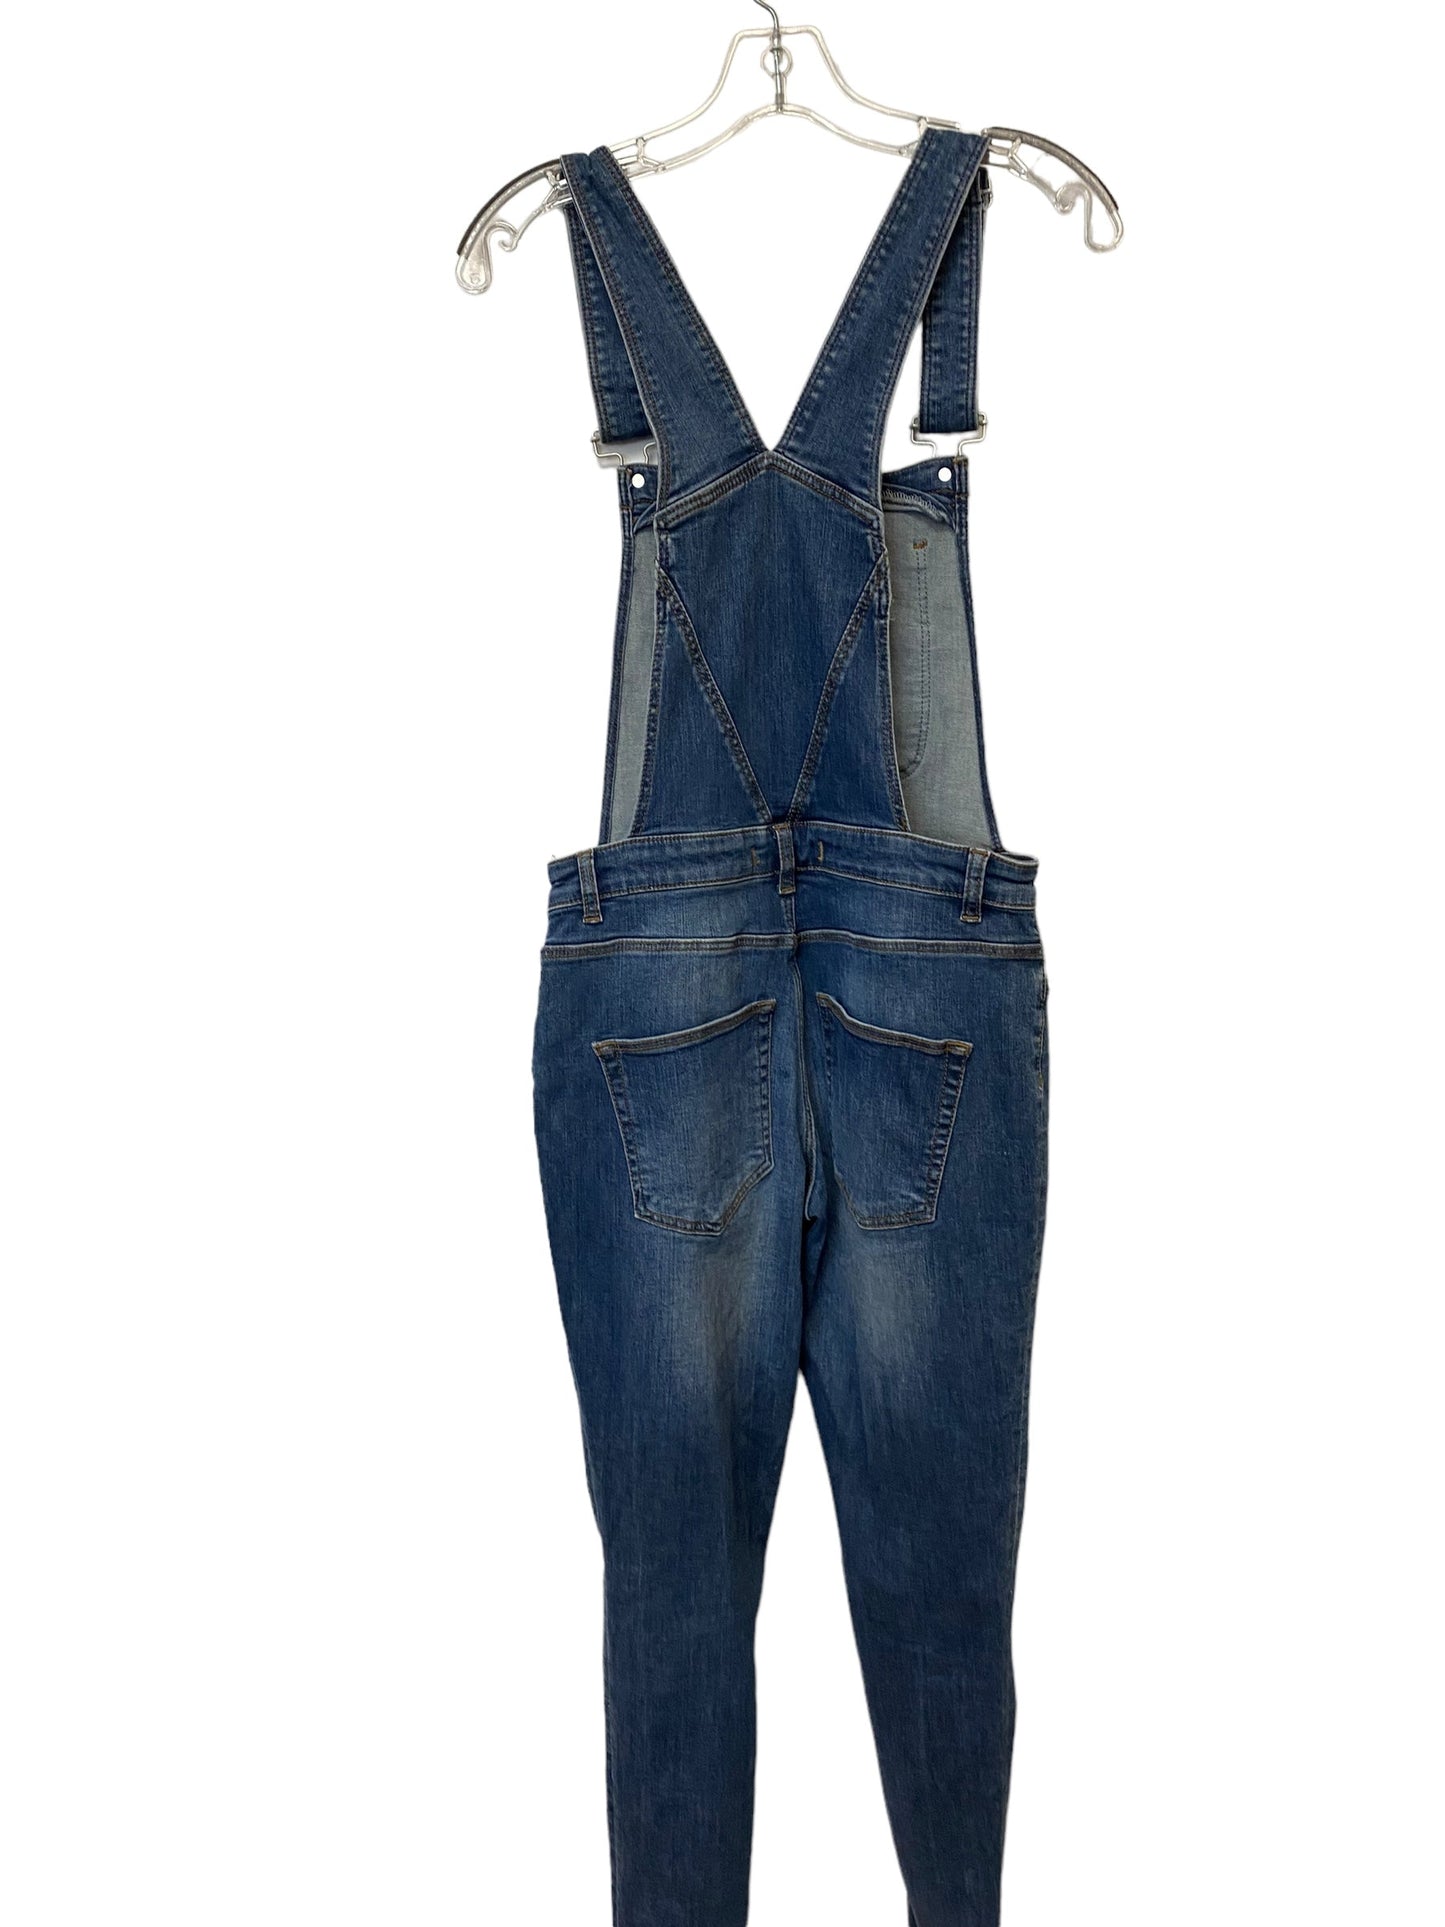 Overalls By Free People  Size: 8